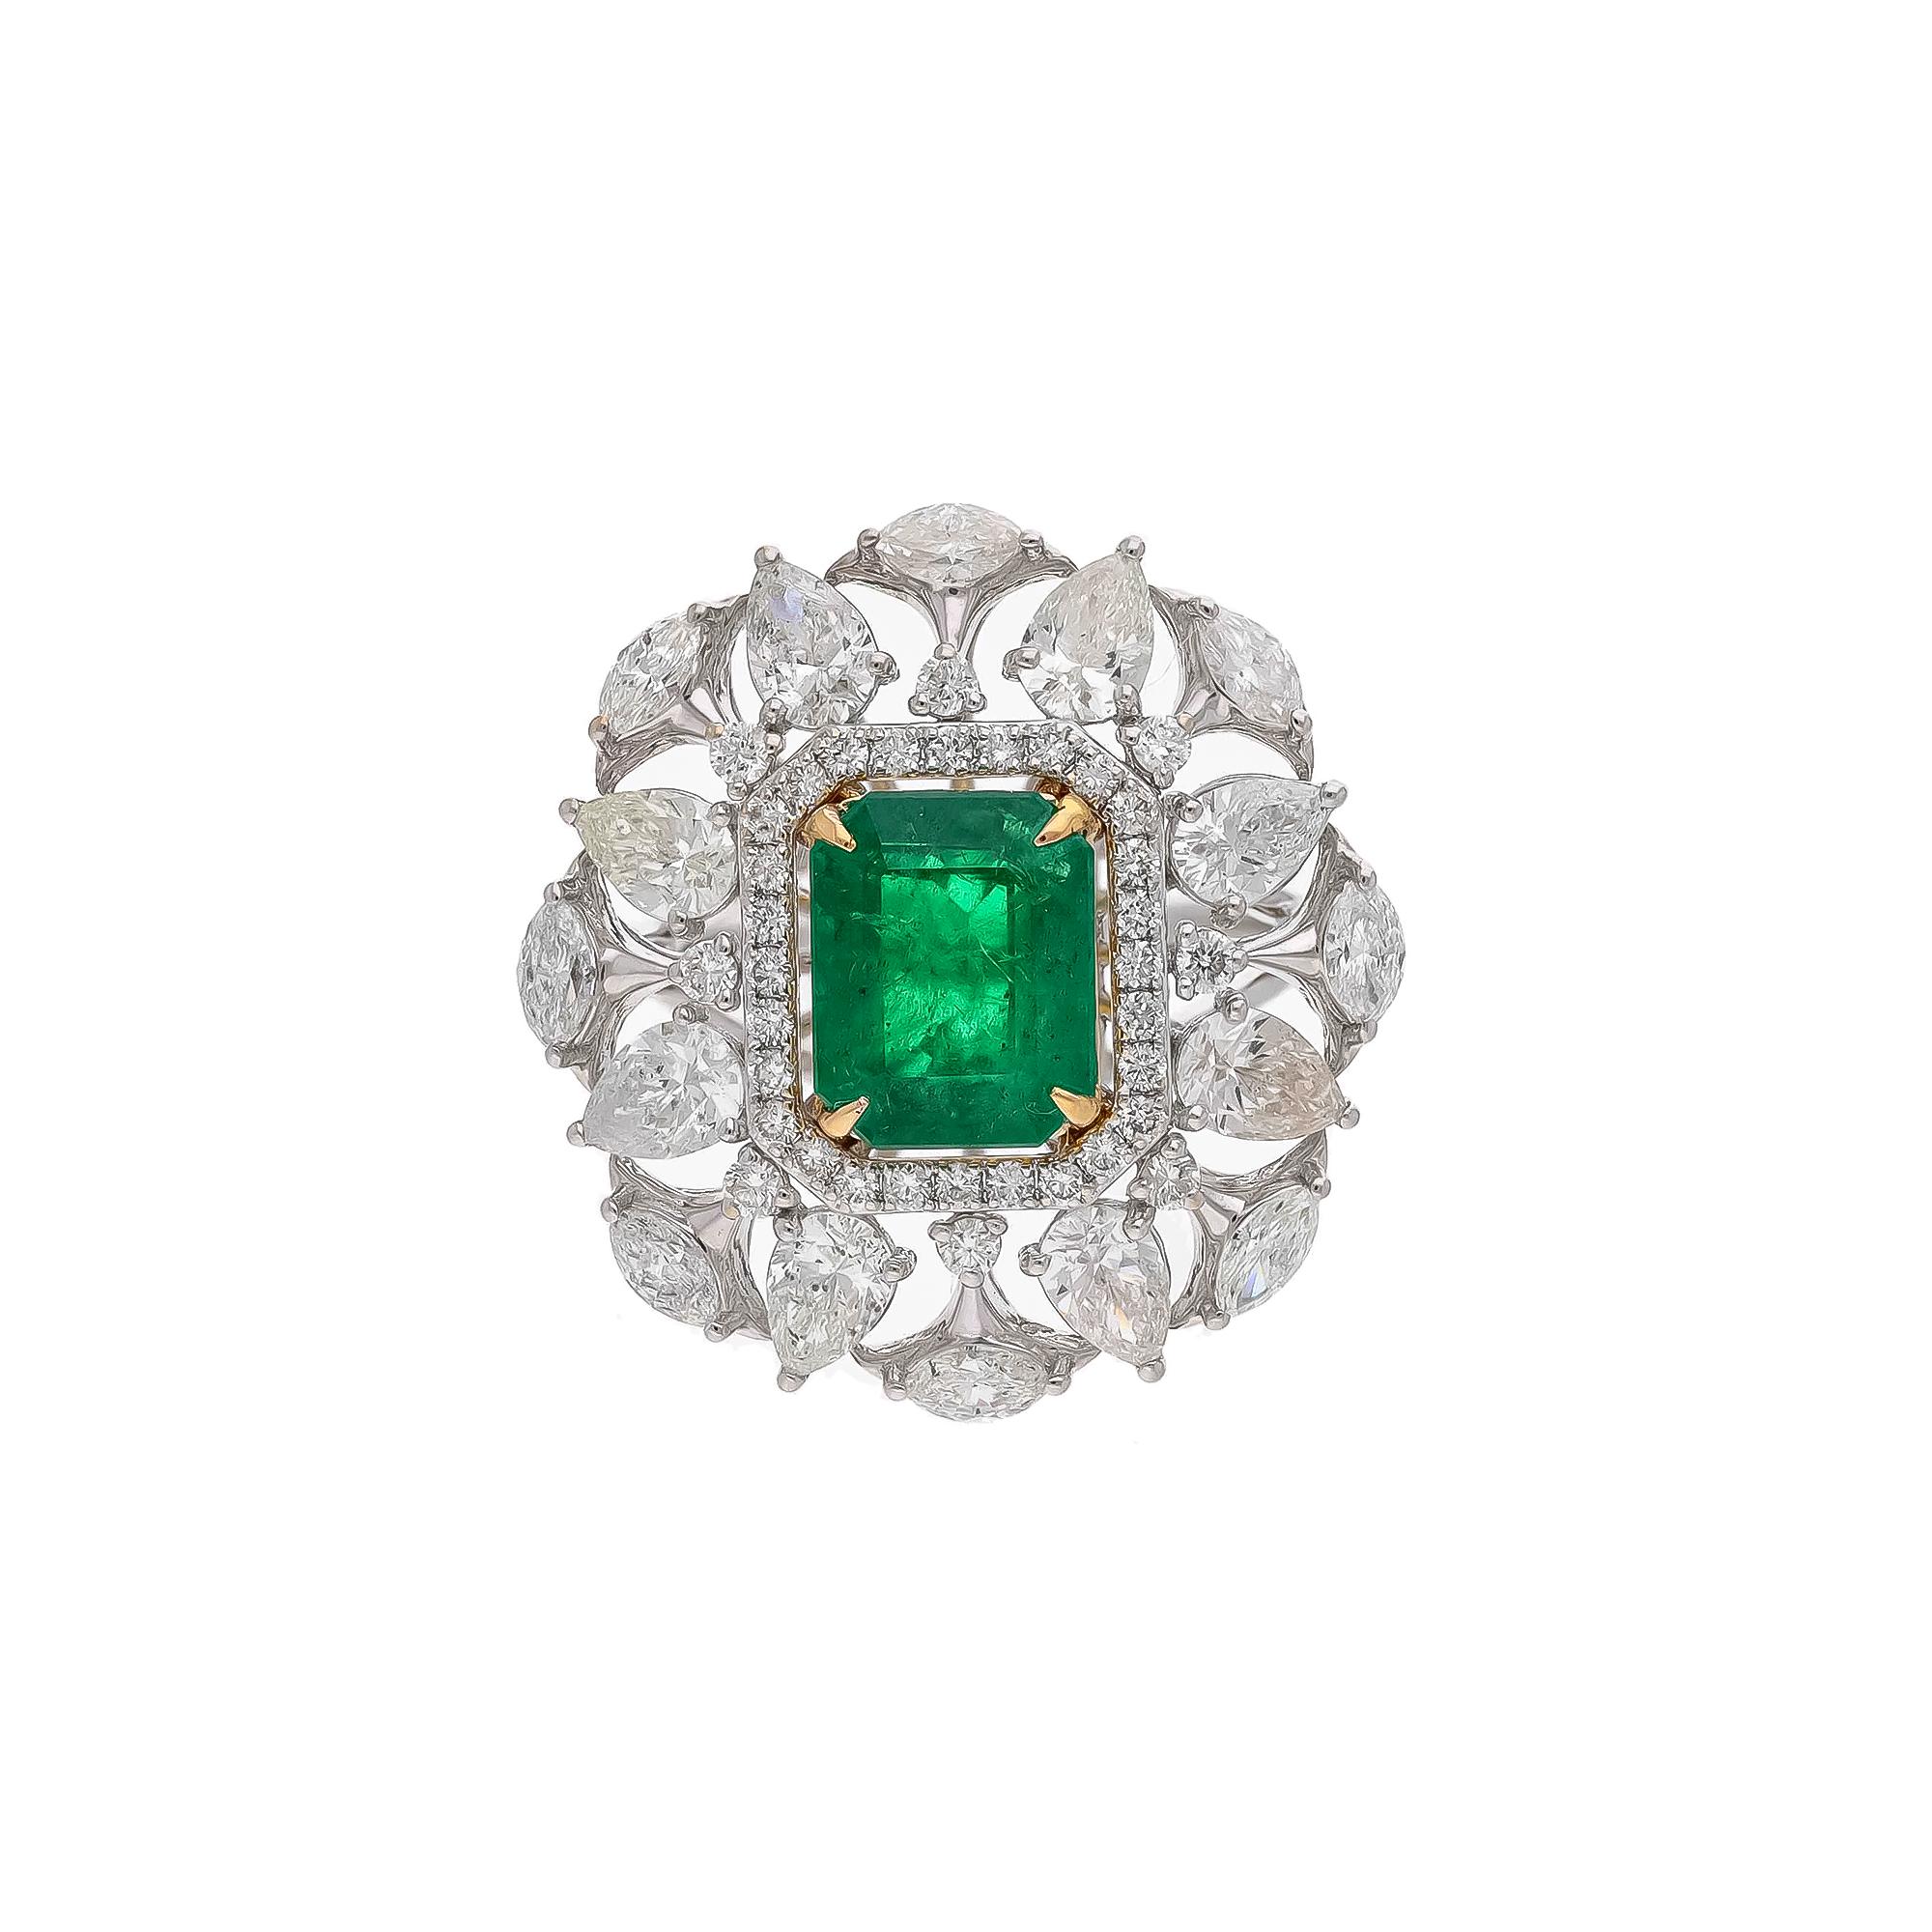 This is a natural Zambian Emerald ring with diamonds and 18k gold. The emeralds are very high quality and very good quality diamonds the clarity is vsi and G colour


Emeralds : 2.74 carats
diamonds : 2.58 carats
gold : 5.756 gms

This is a Brand